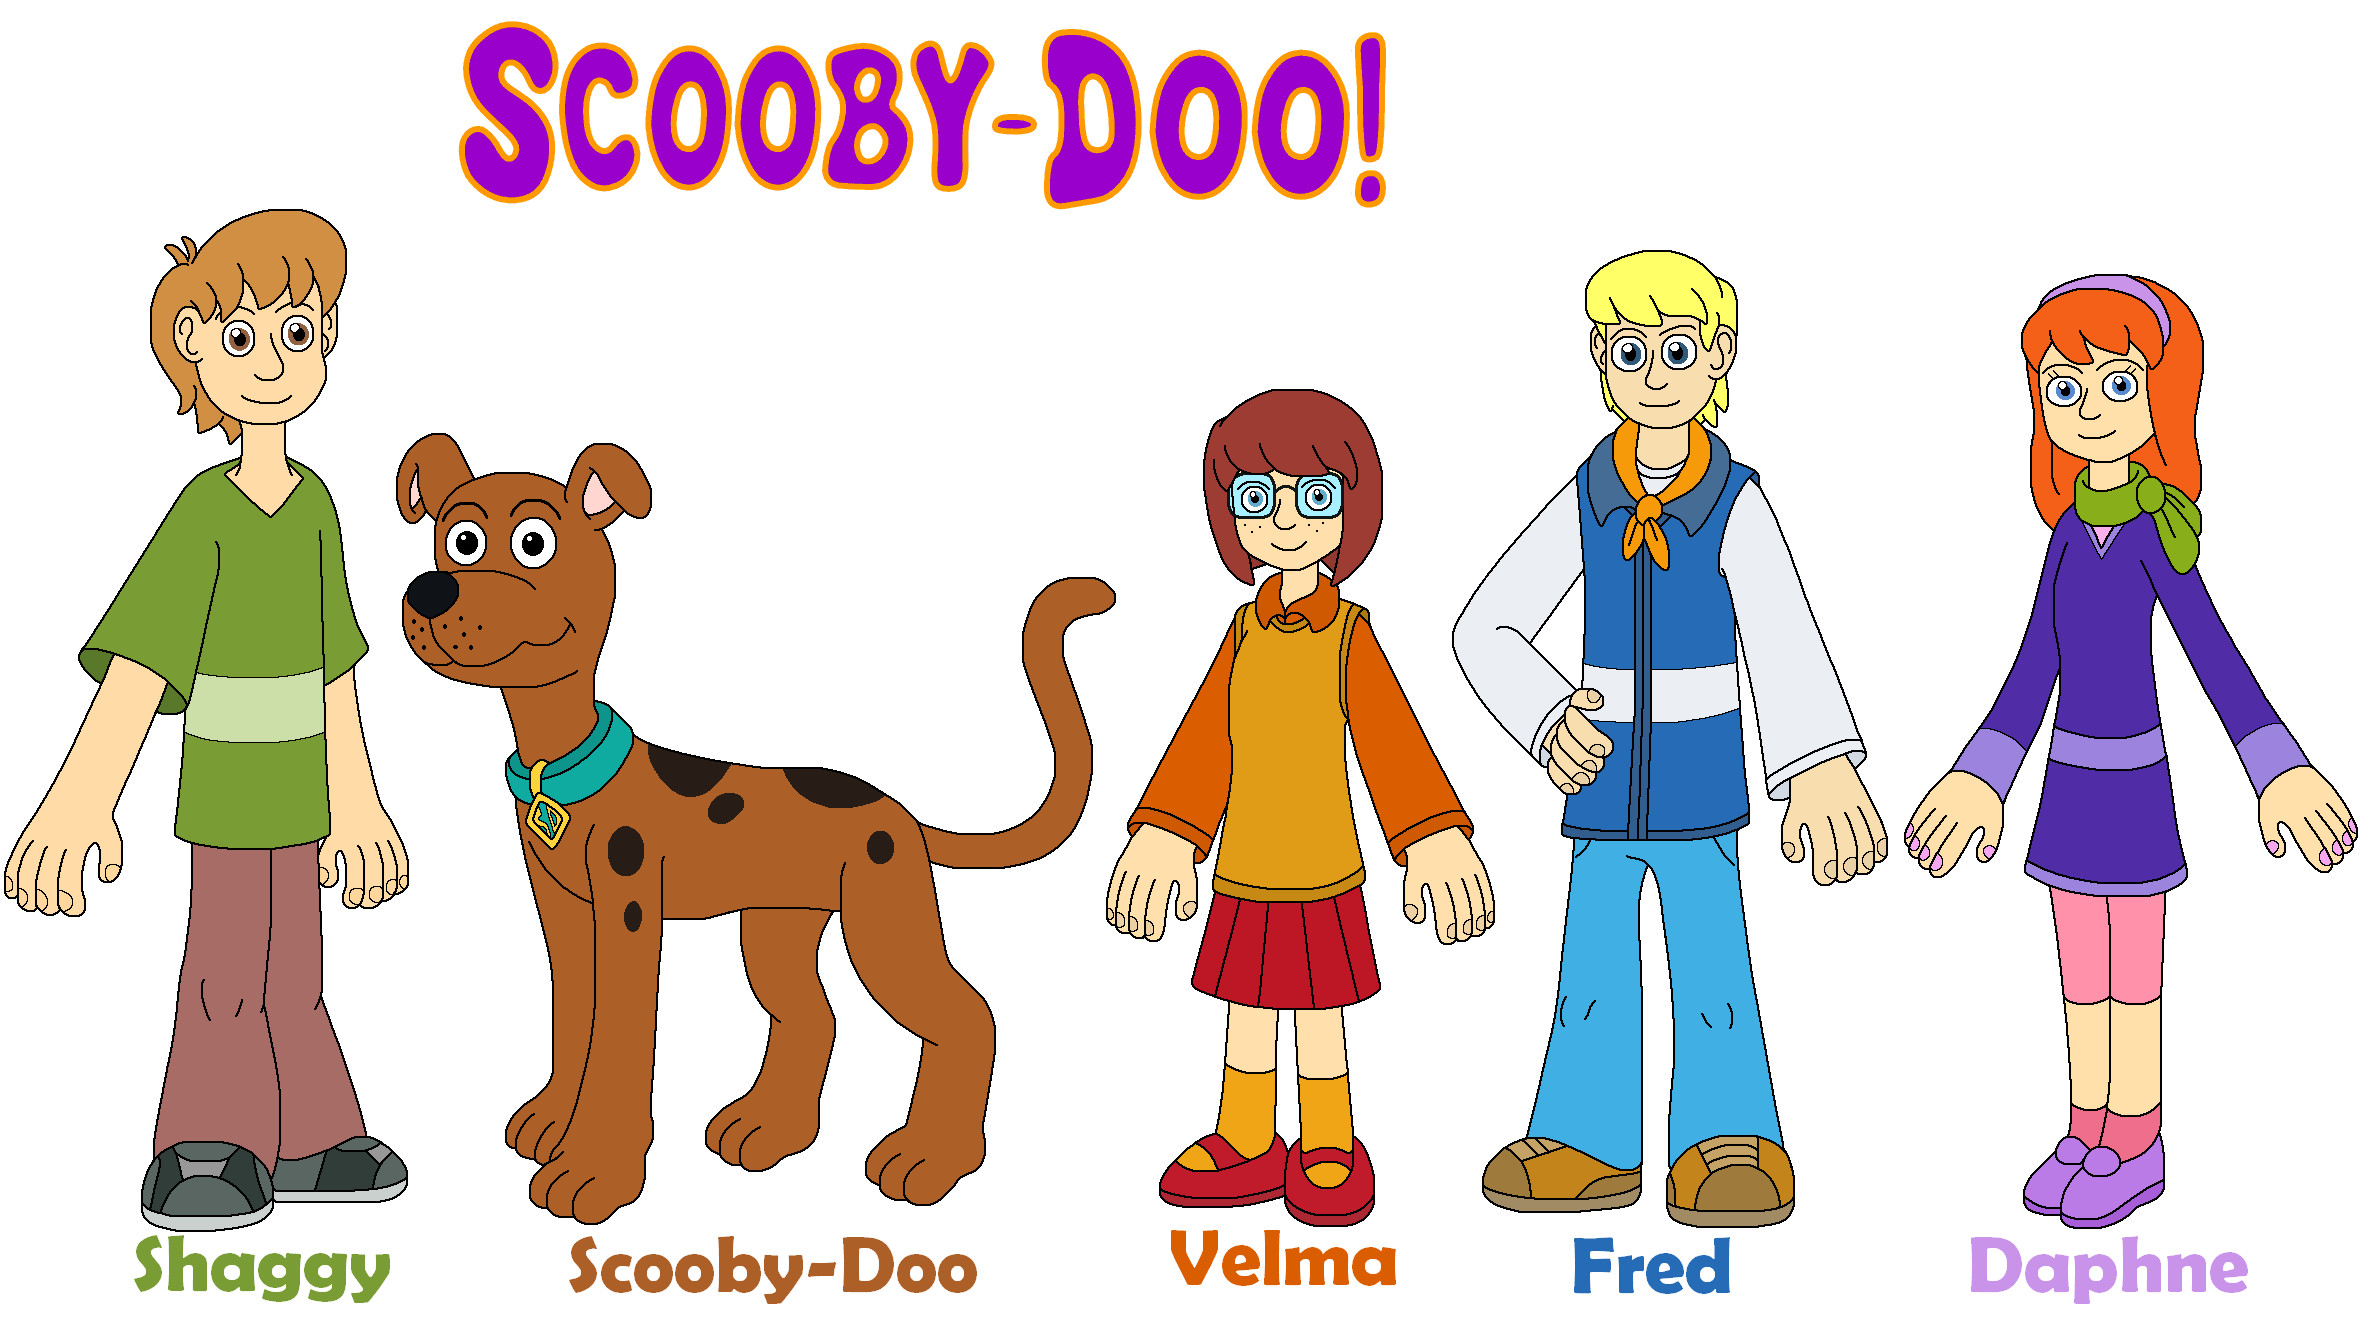 Scooby-Doo and his friends by MCsaurus on DeviantArt